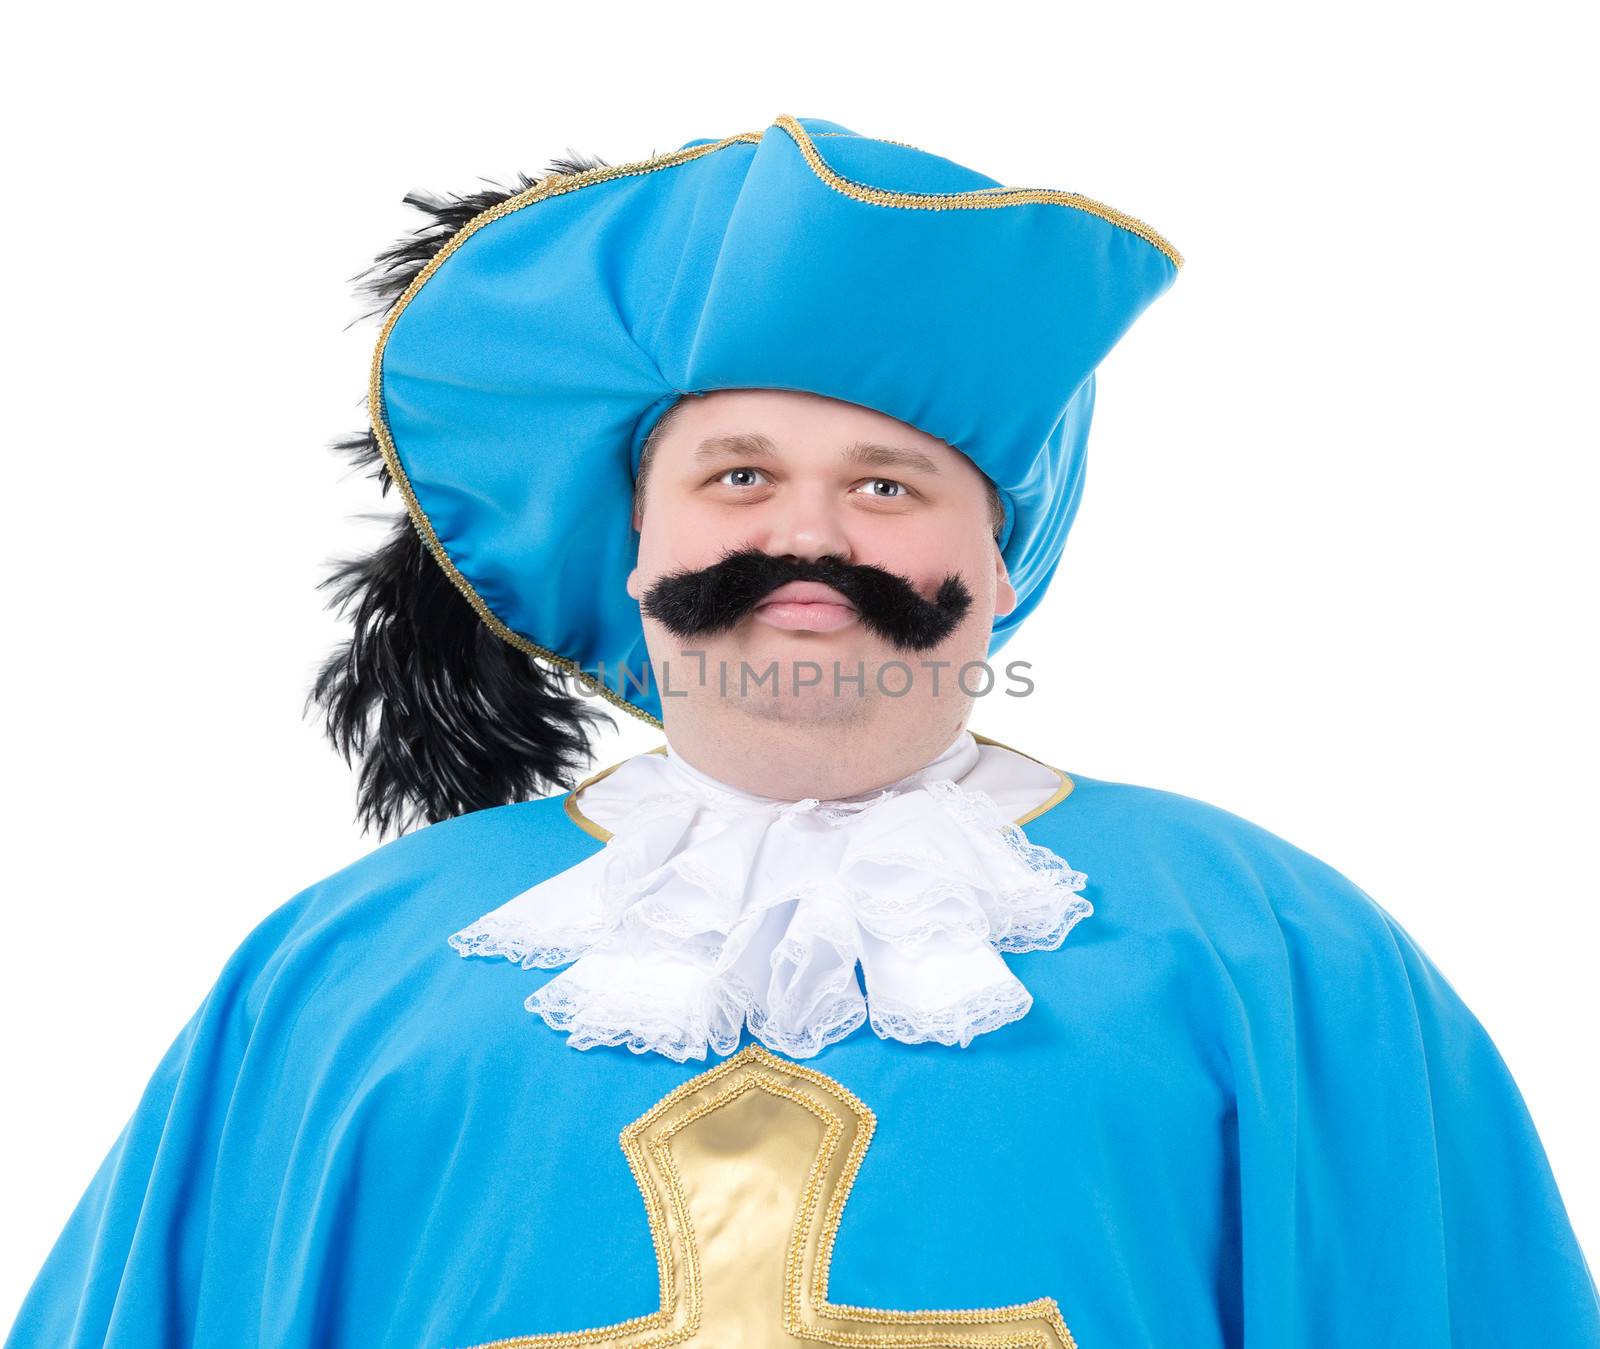 Musketeer in turquoise blue uniform by Discovod